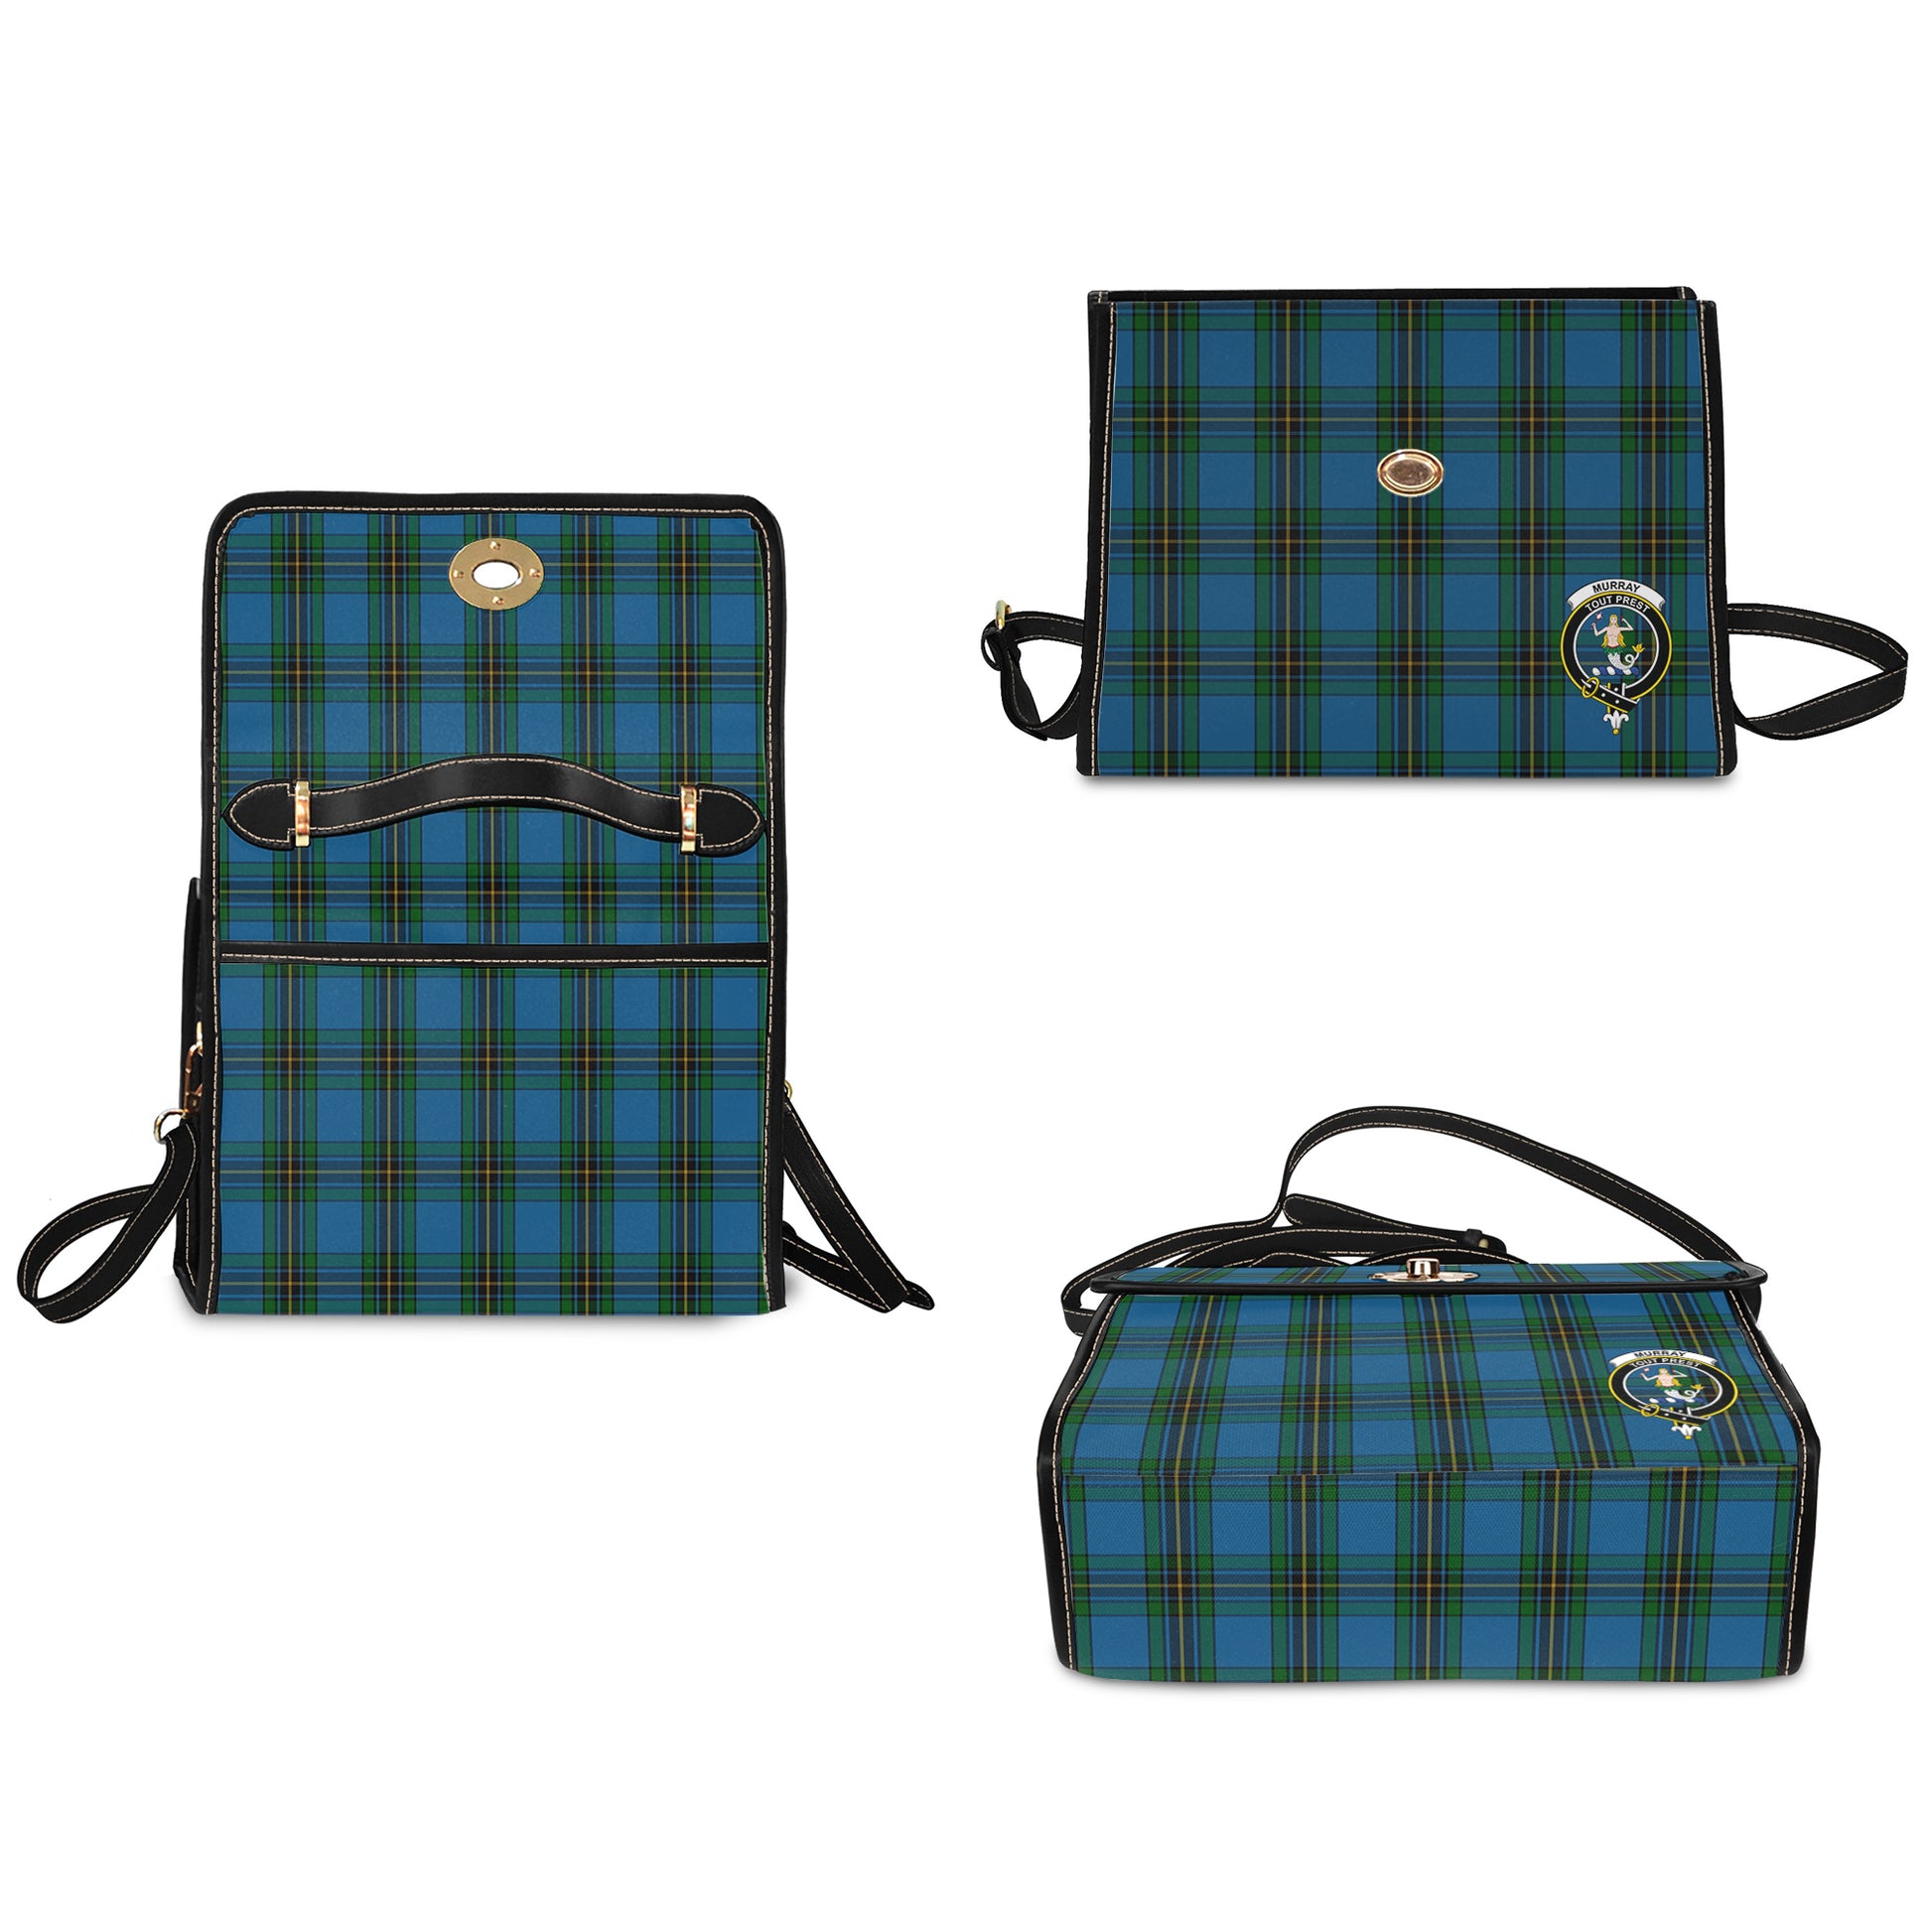 murray-of-elibank-tartan-leather-strap-waterproof-canvas-bag-with-family-crest